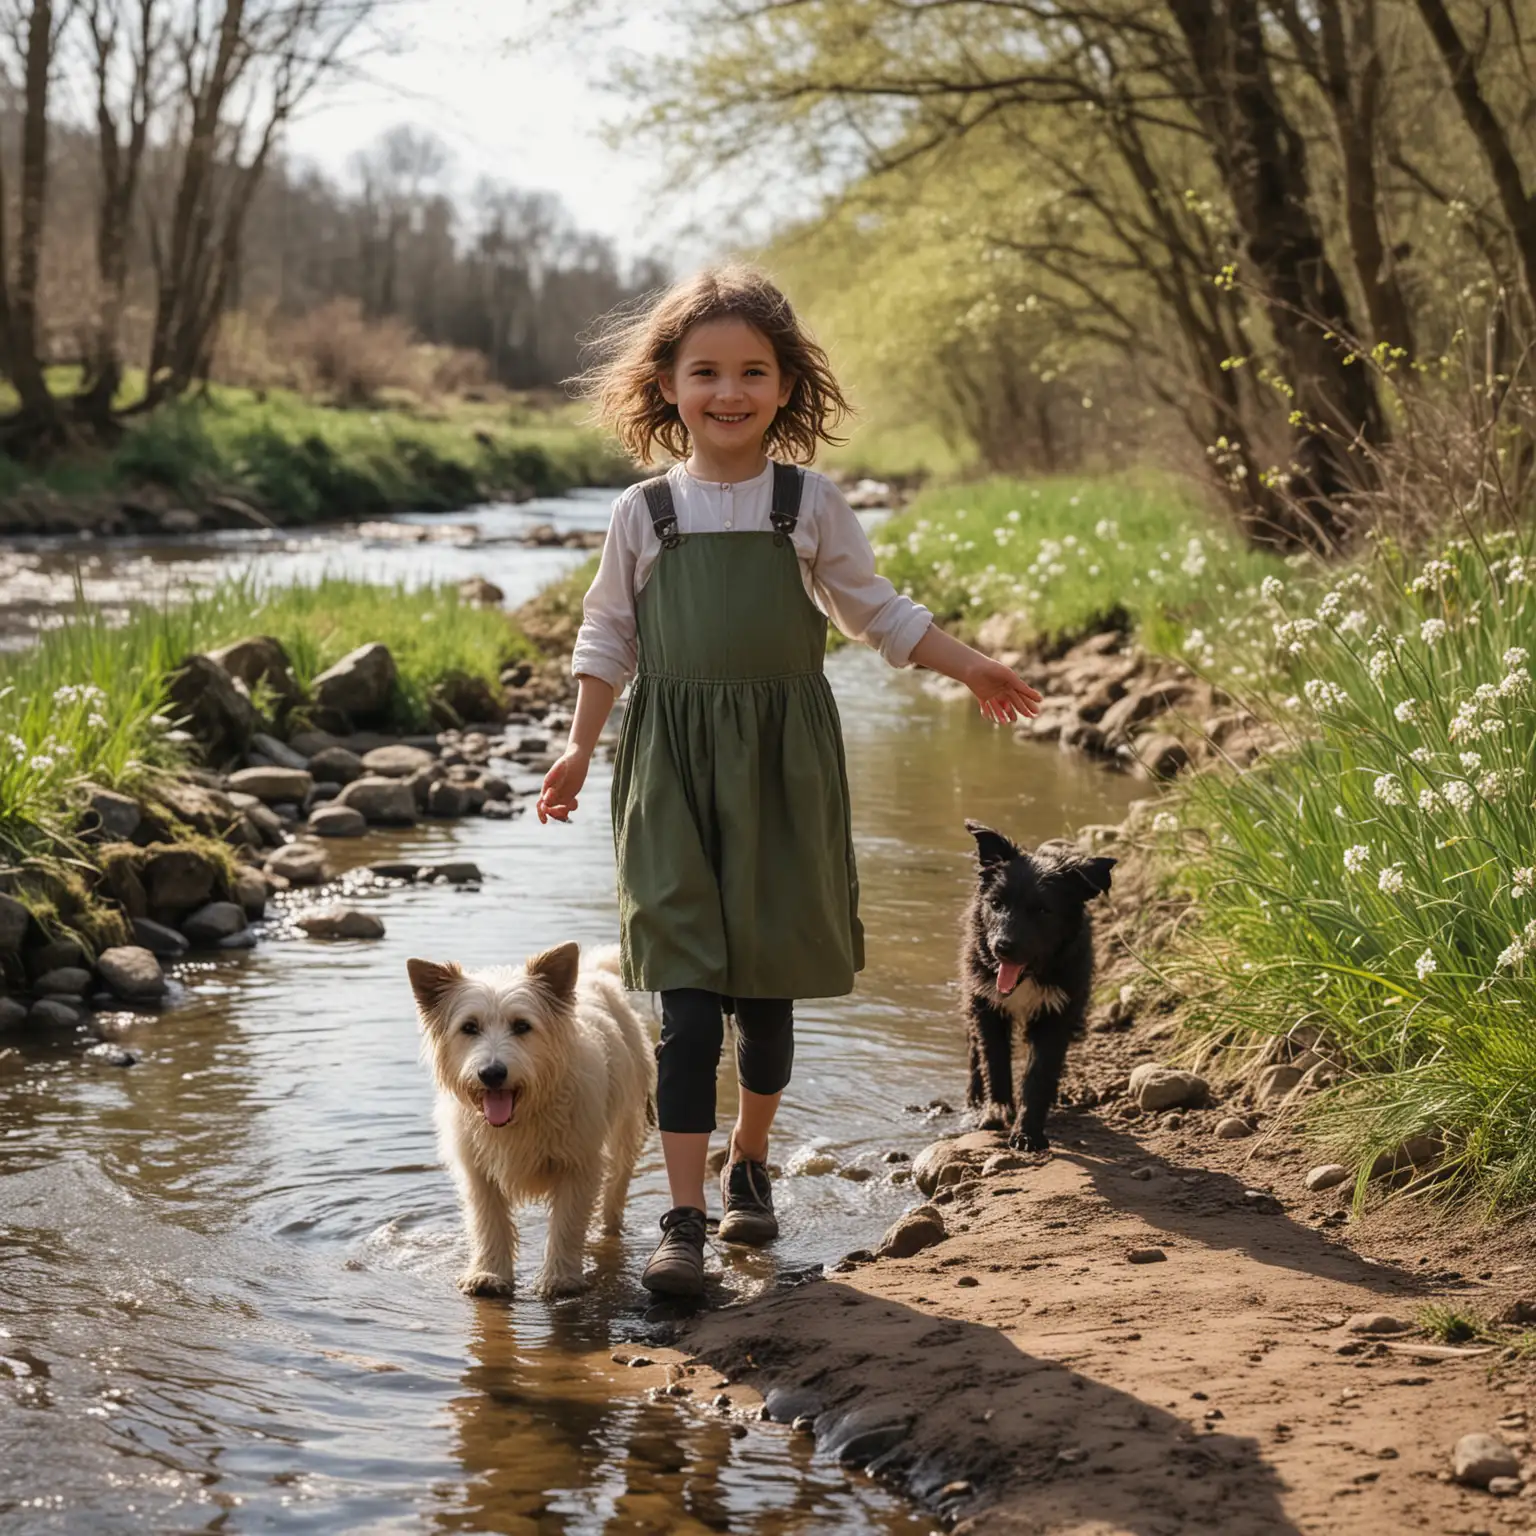 spring afternoon, a little girl, on the other side of a small river, smiling and waving at you, with a little shepherd dog beside her